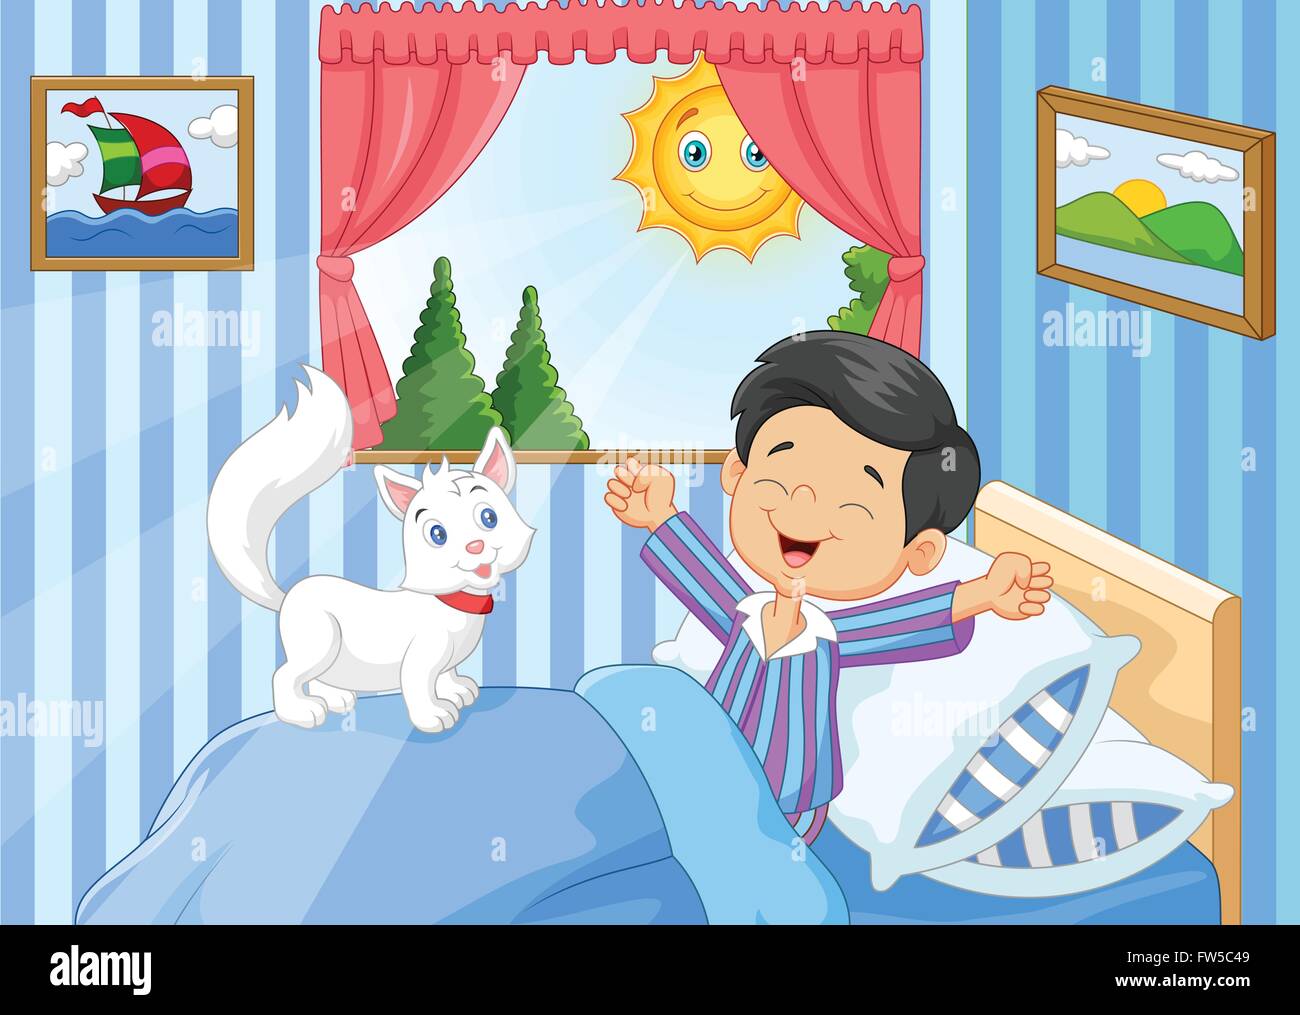 Cartoon Little boy waking up and yawning Stock Vector